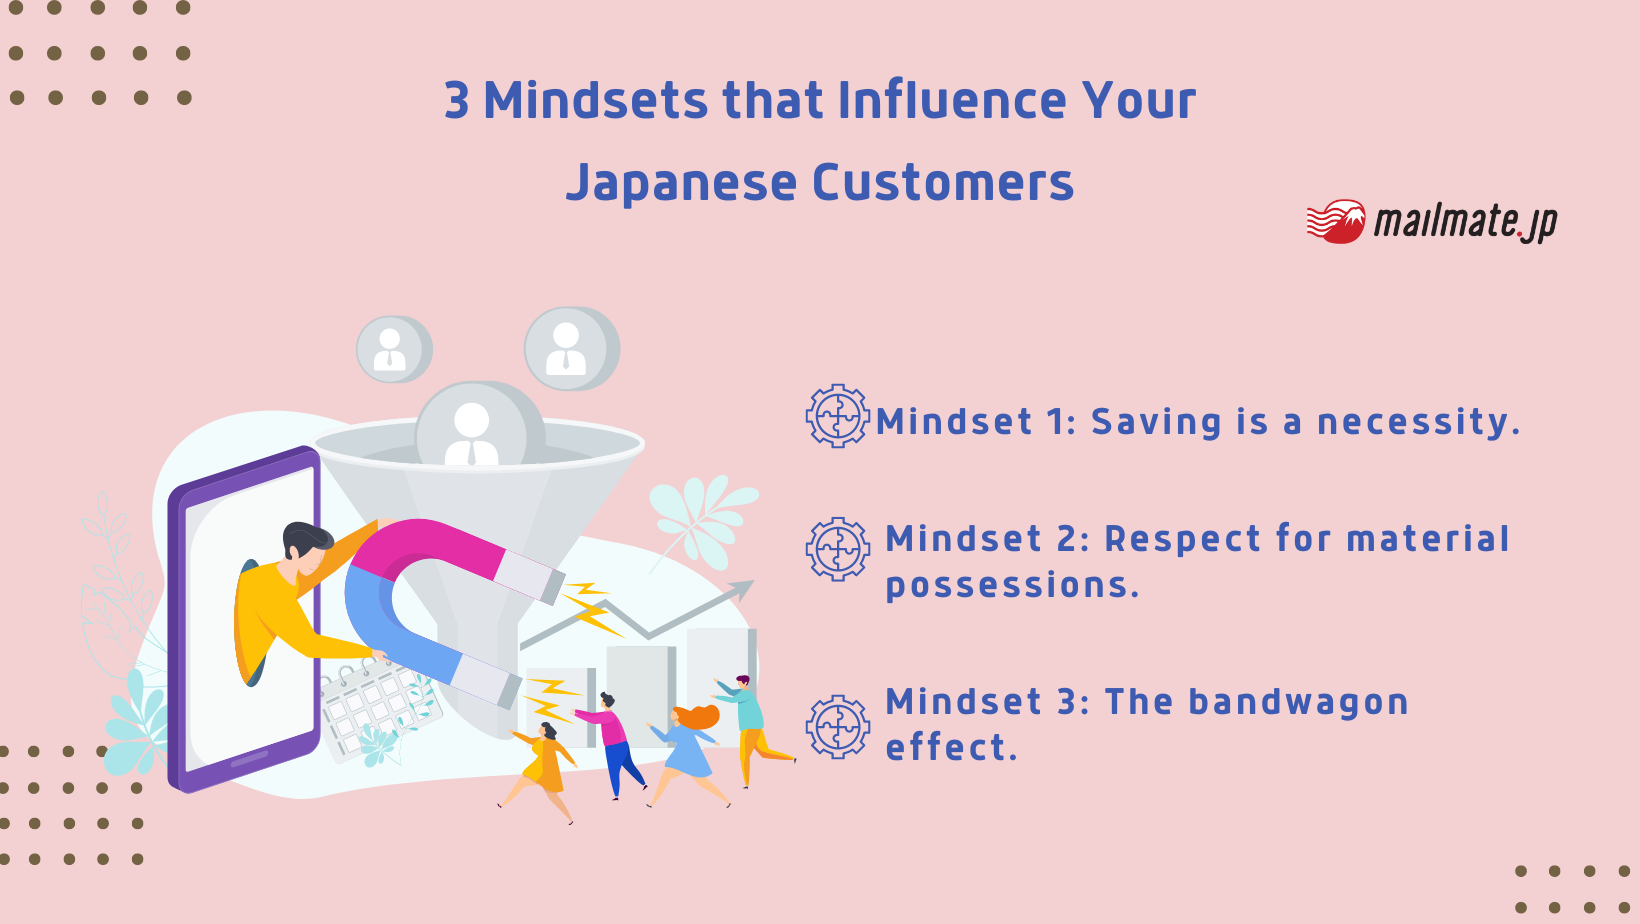 3 Mindsets that Influence Your Japanese Customers